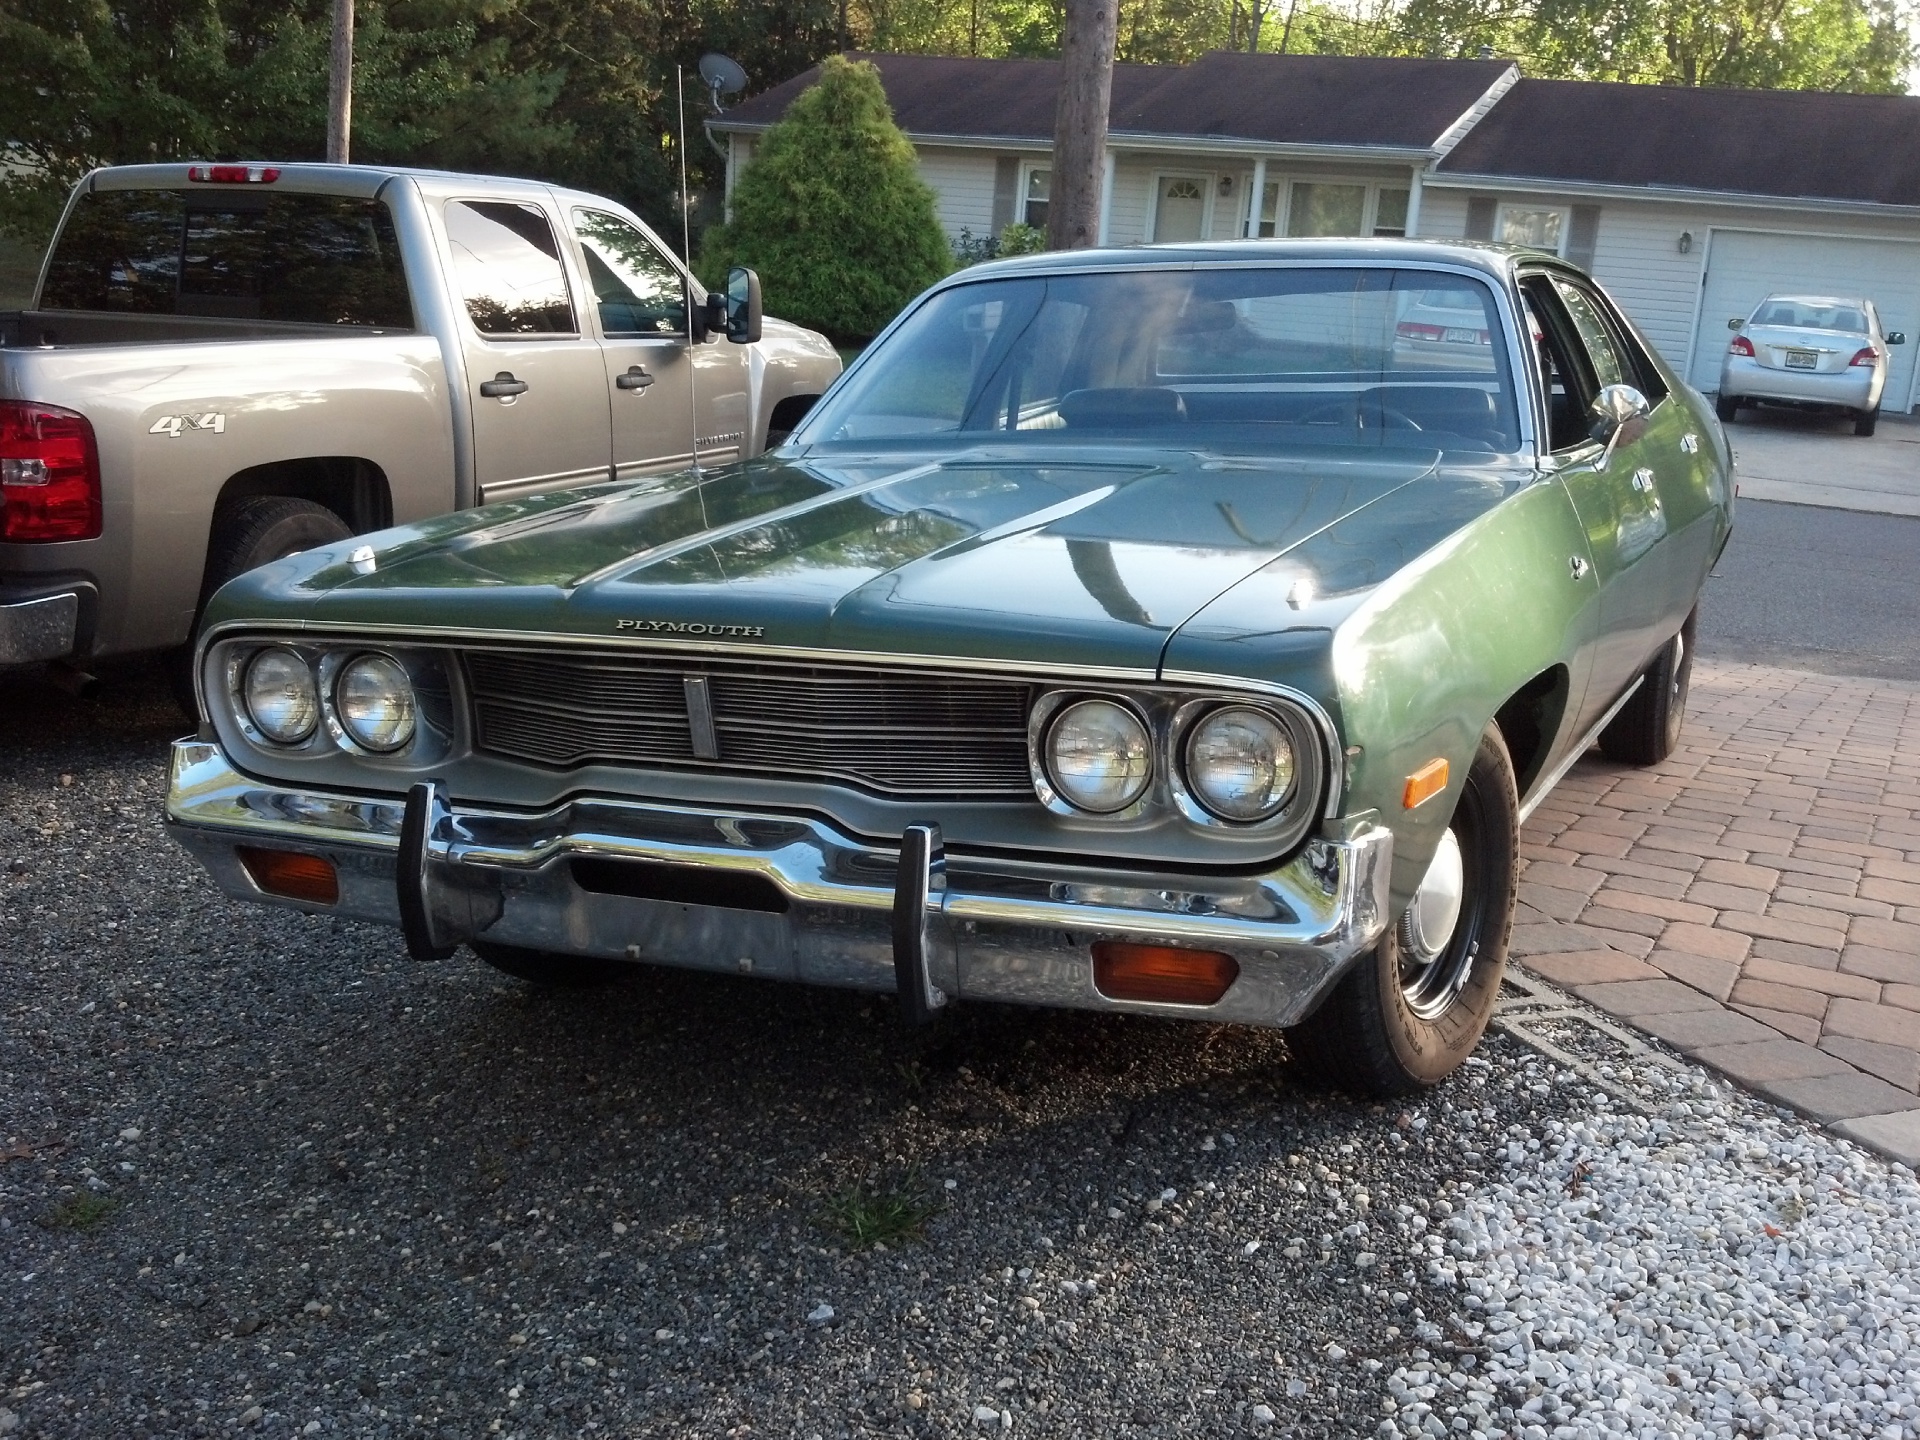 1974 Plymouth Satellite Stock # PLYMOUTHSAT for sale near New York, NY